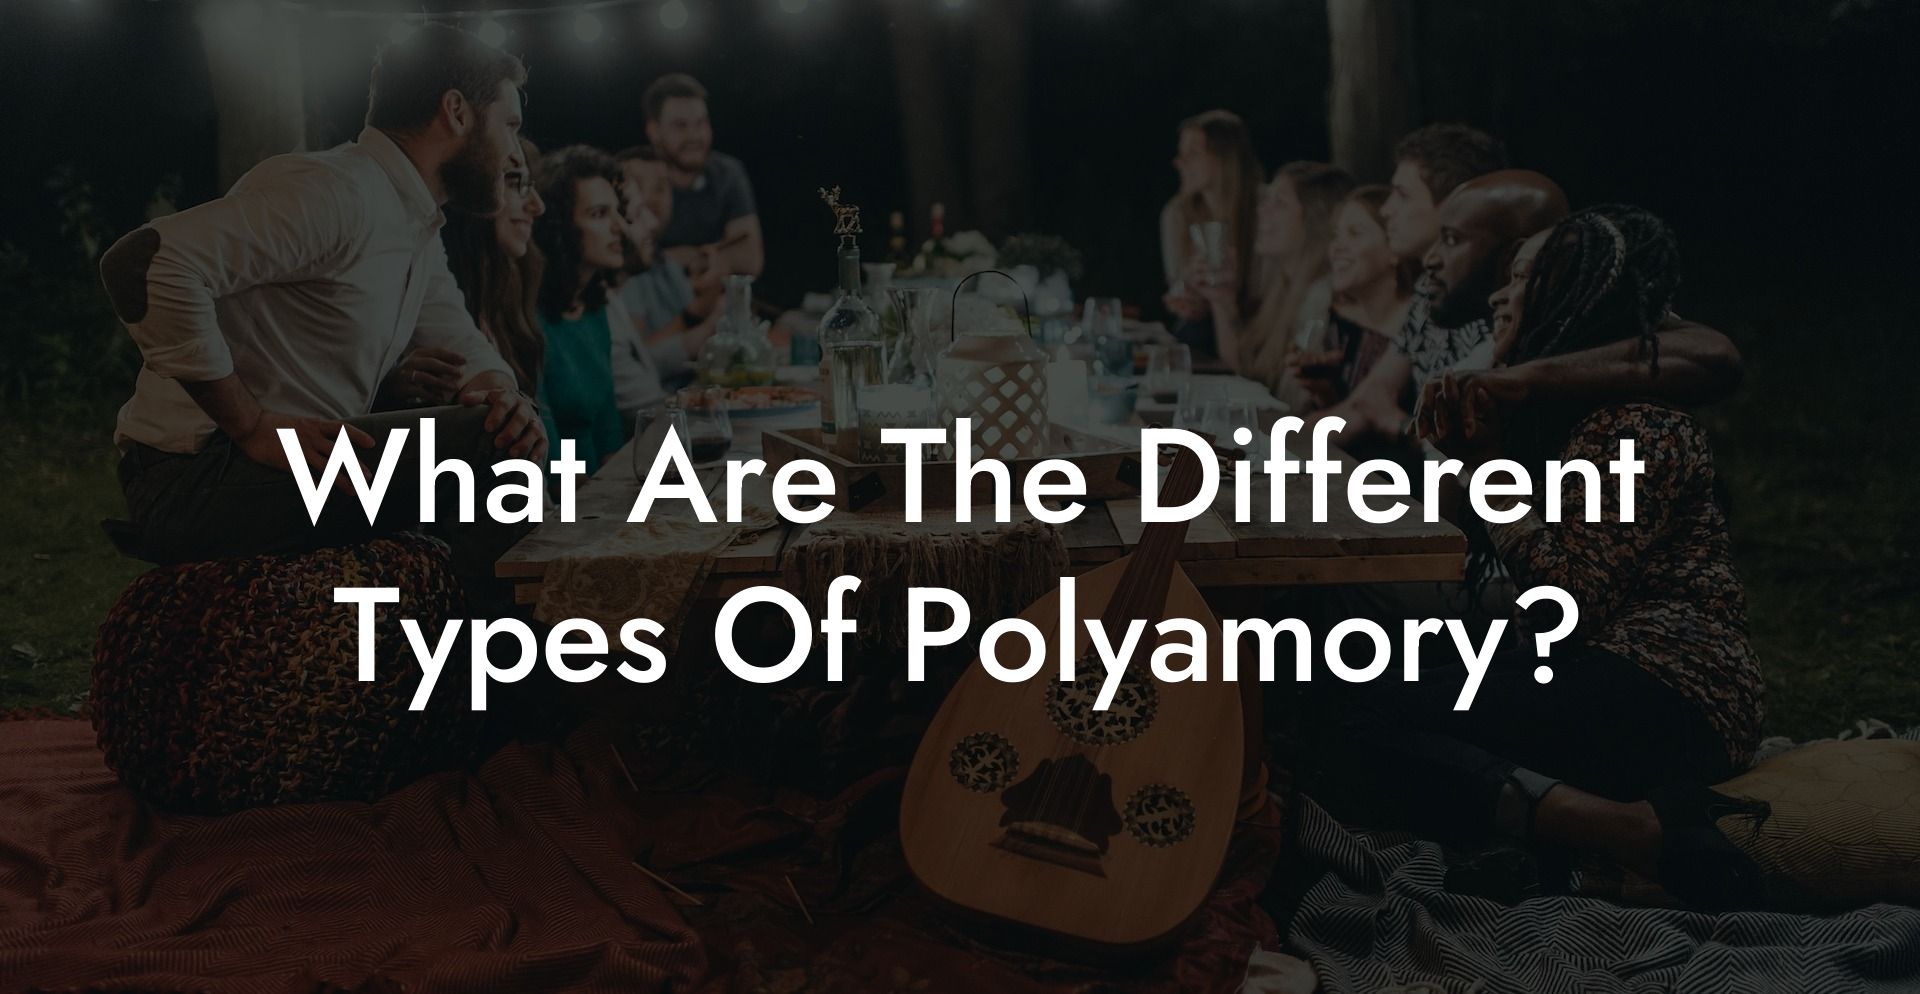 What Are The Different Types Of Polyamory?